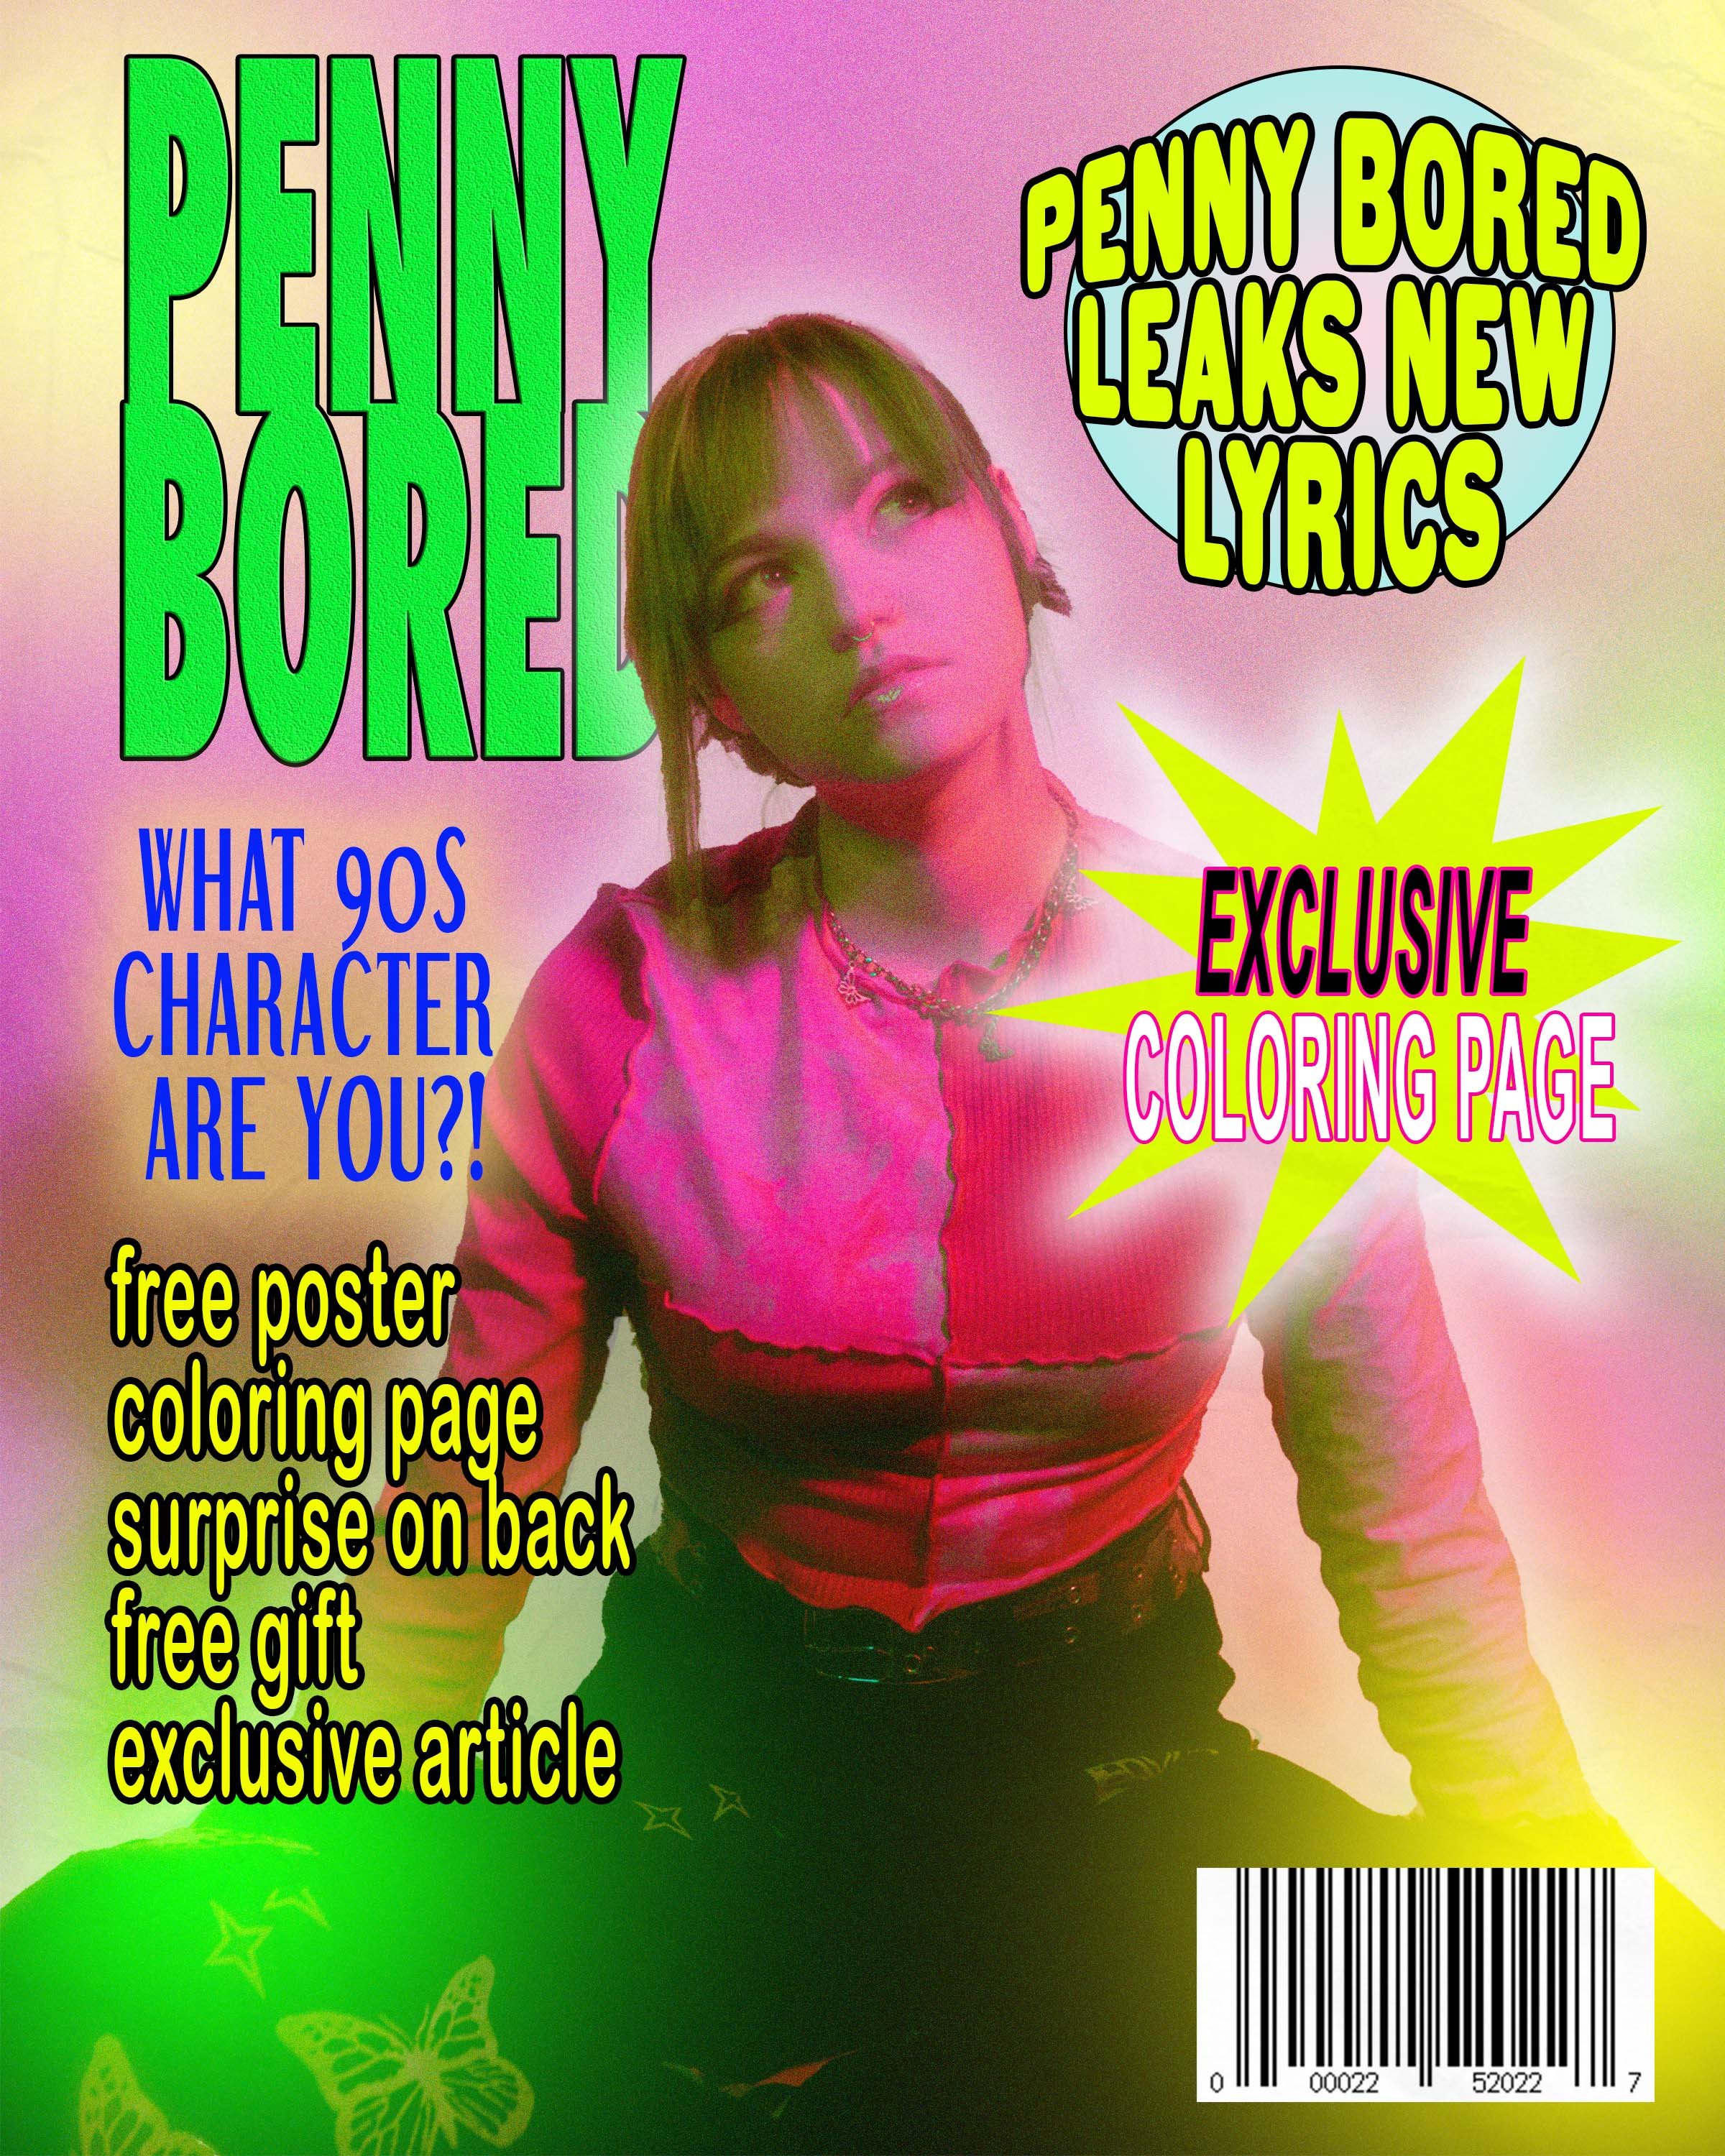 Penny Bored Zine Cover